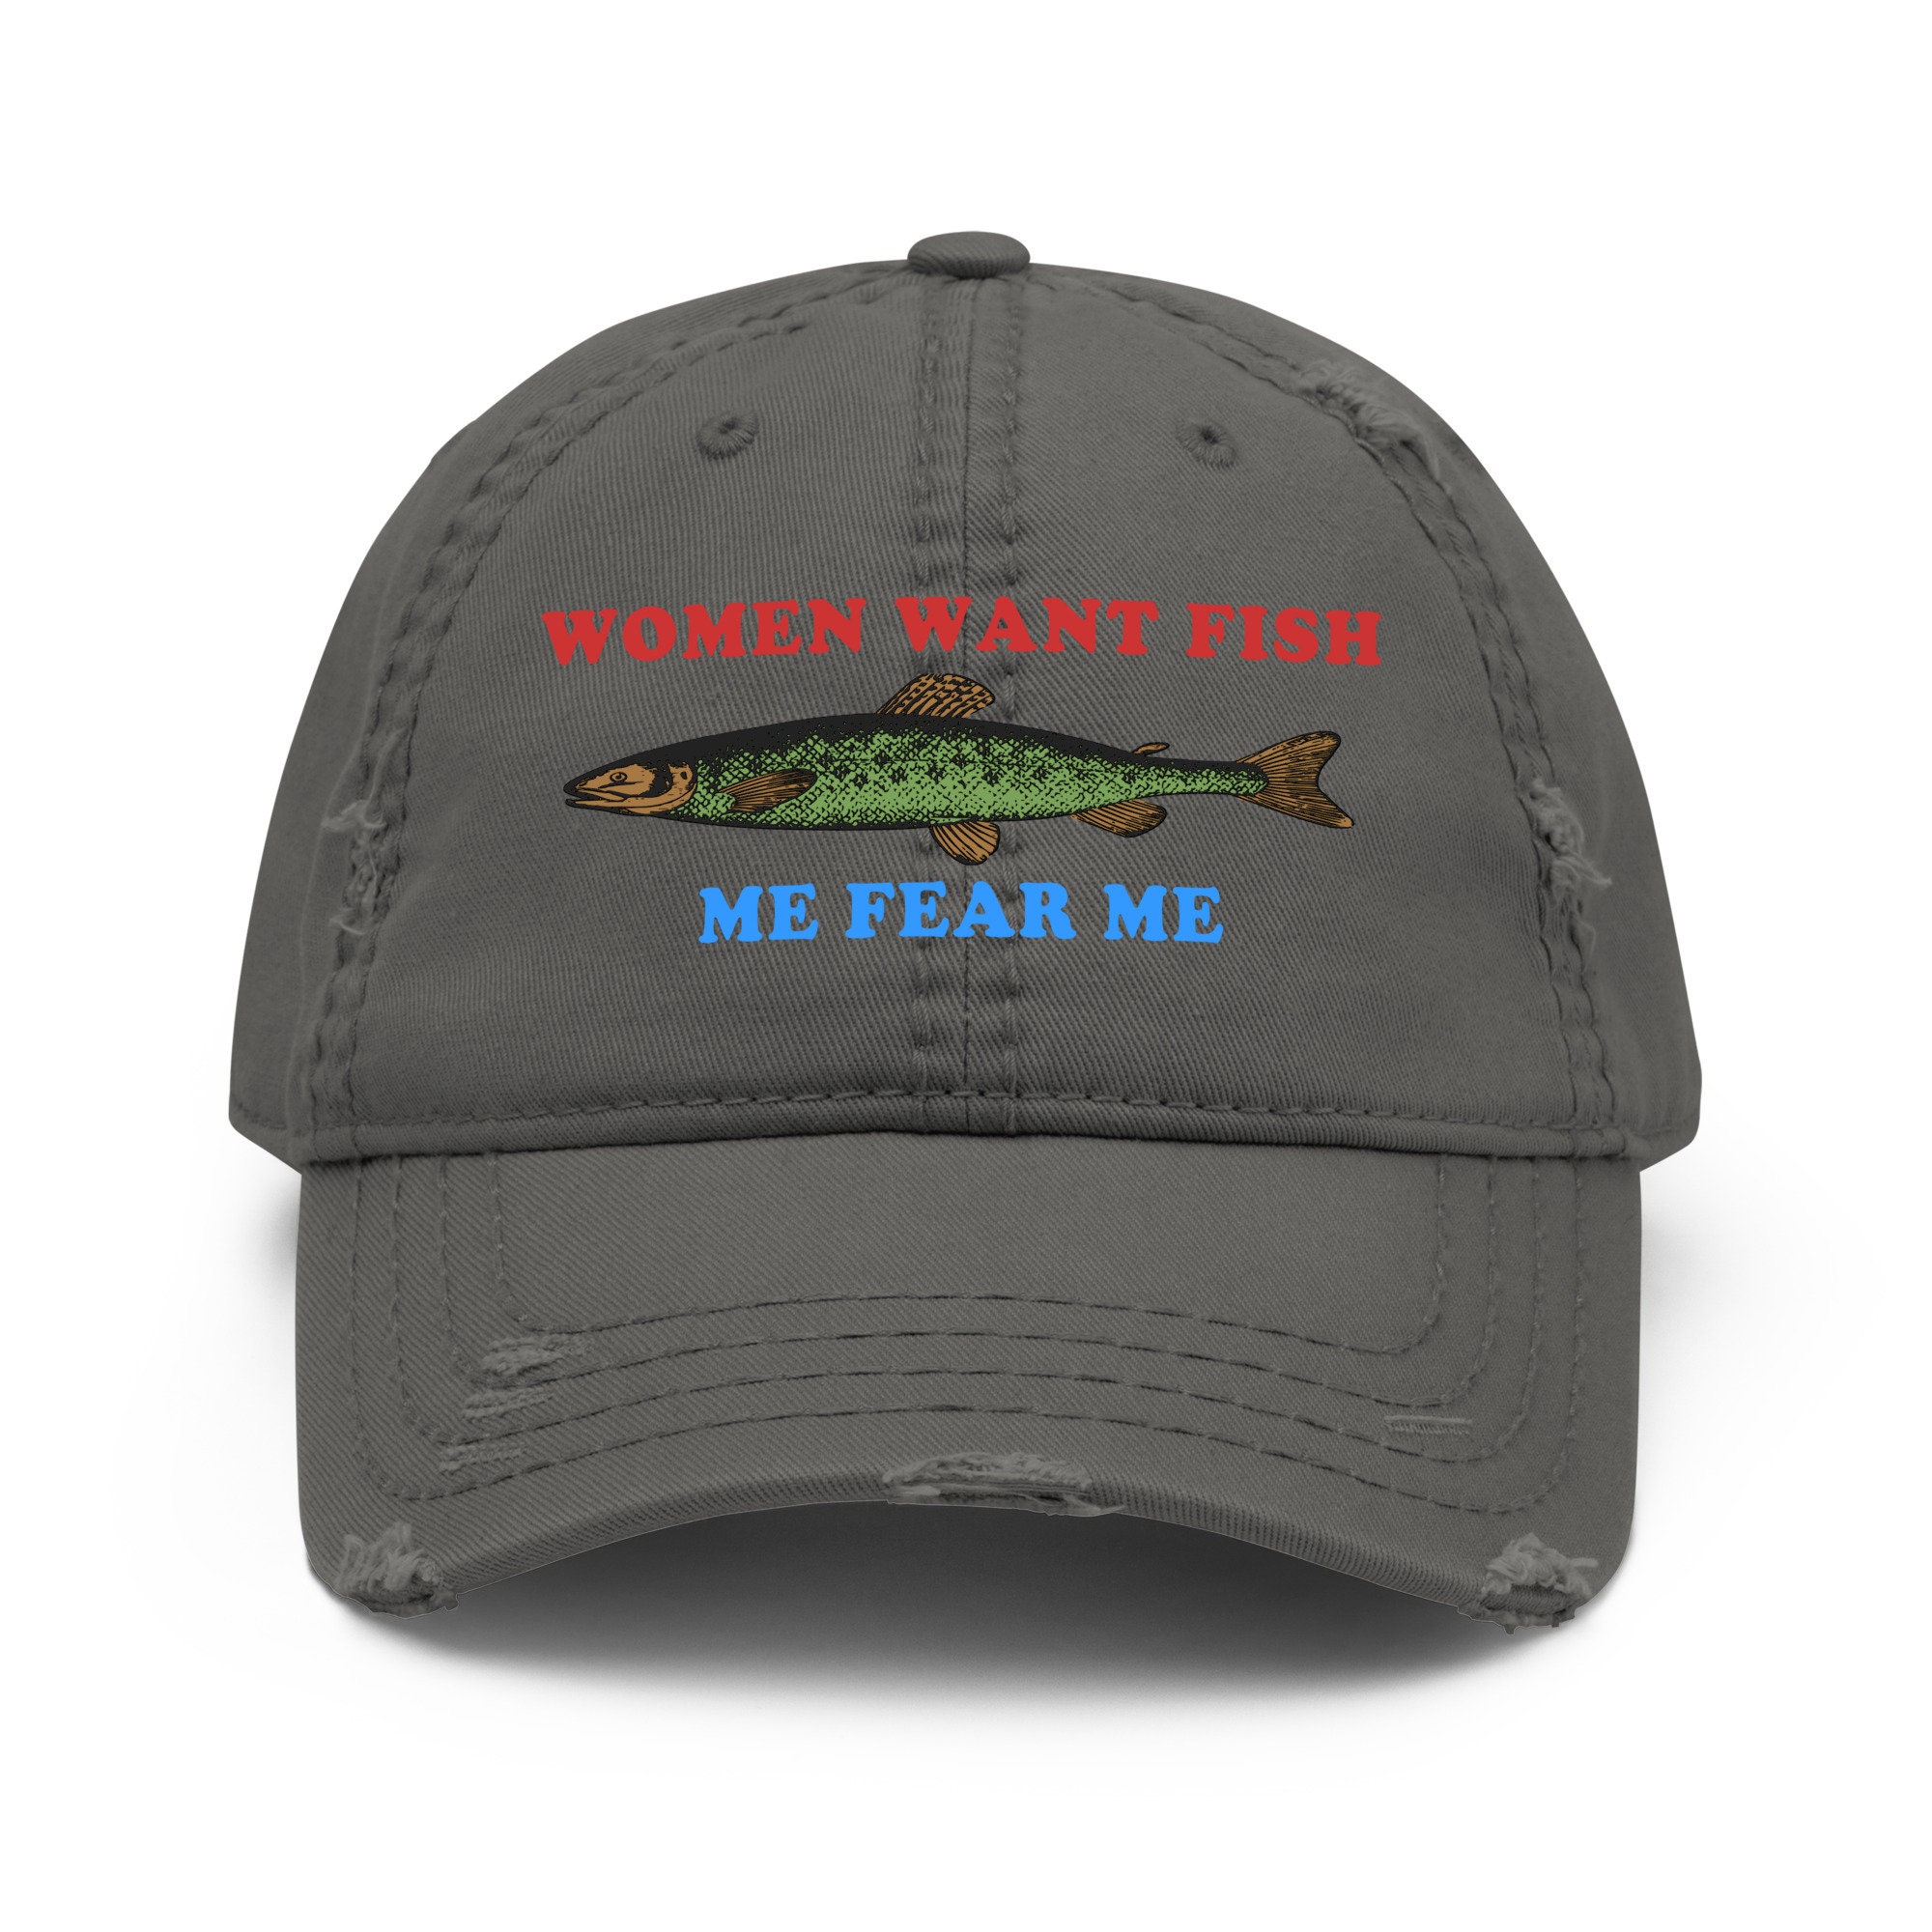 Women Want Fish Me Fear Me Oddly Specific Meme, Fishing Hat -  Canada